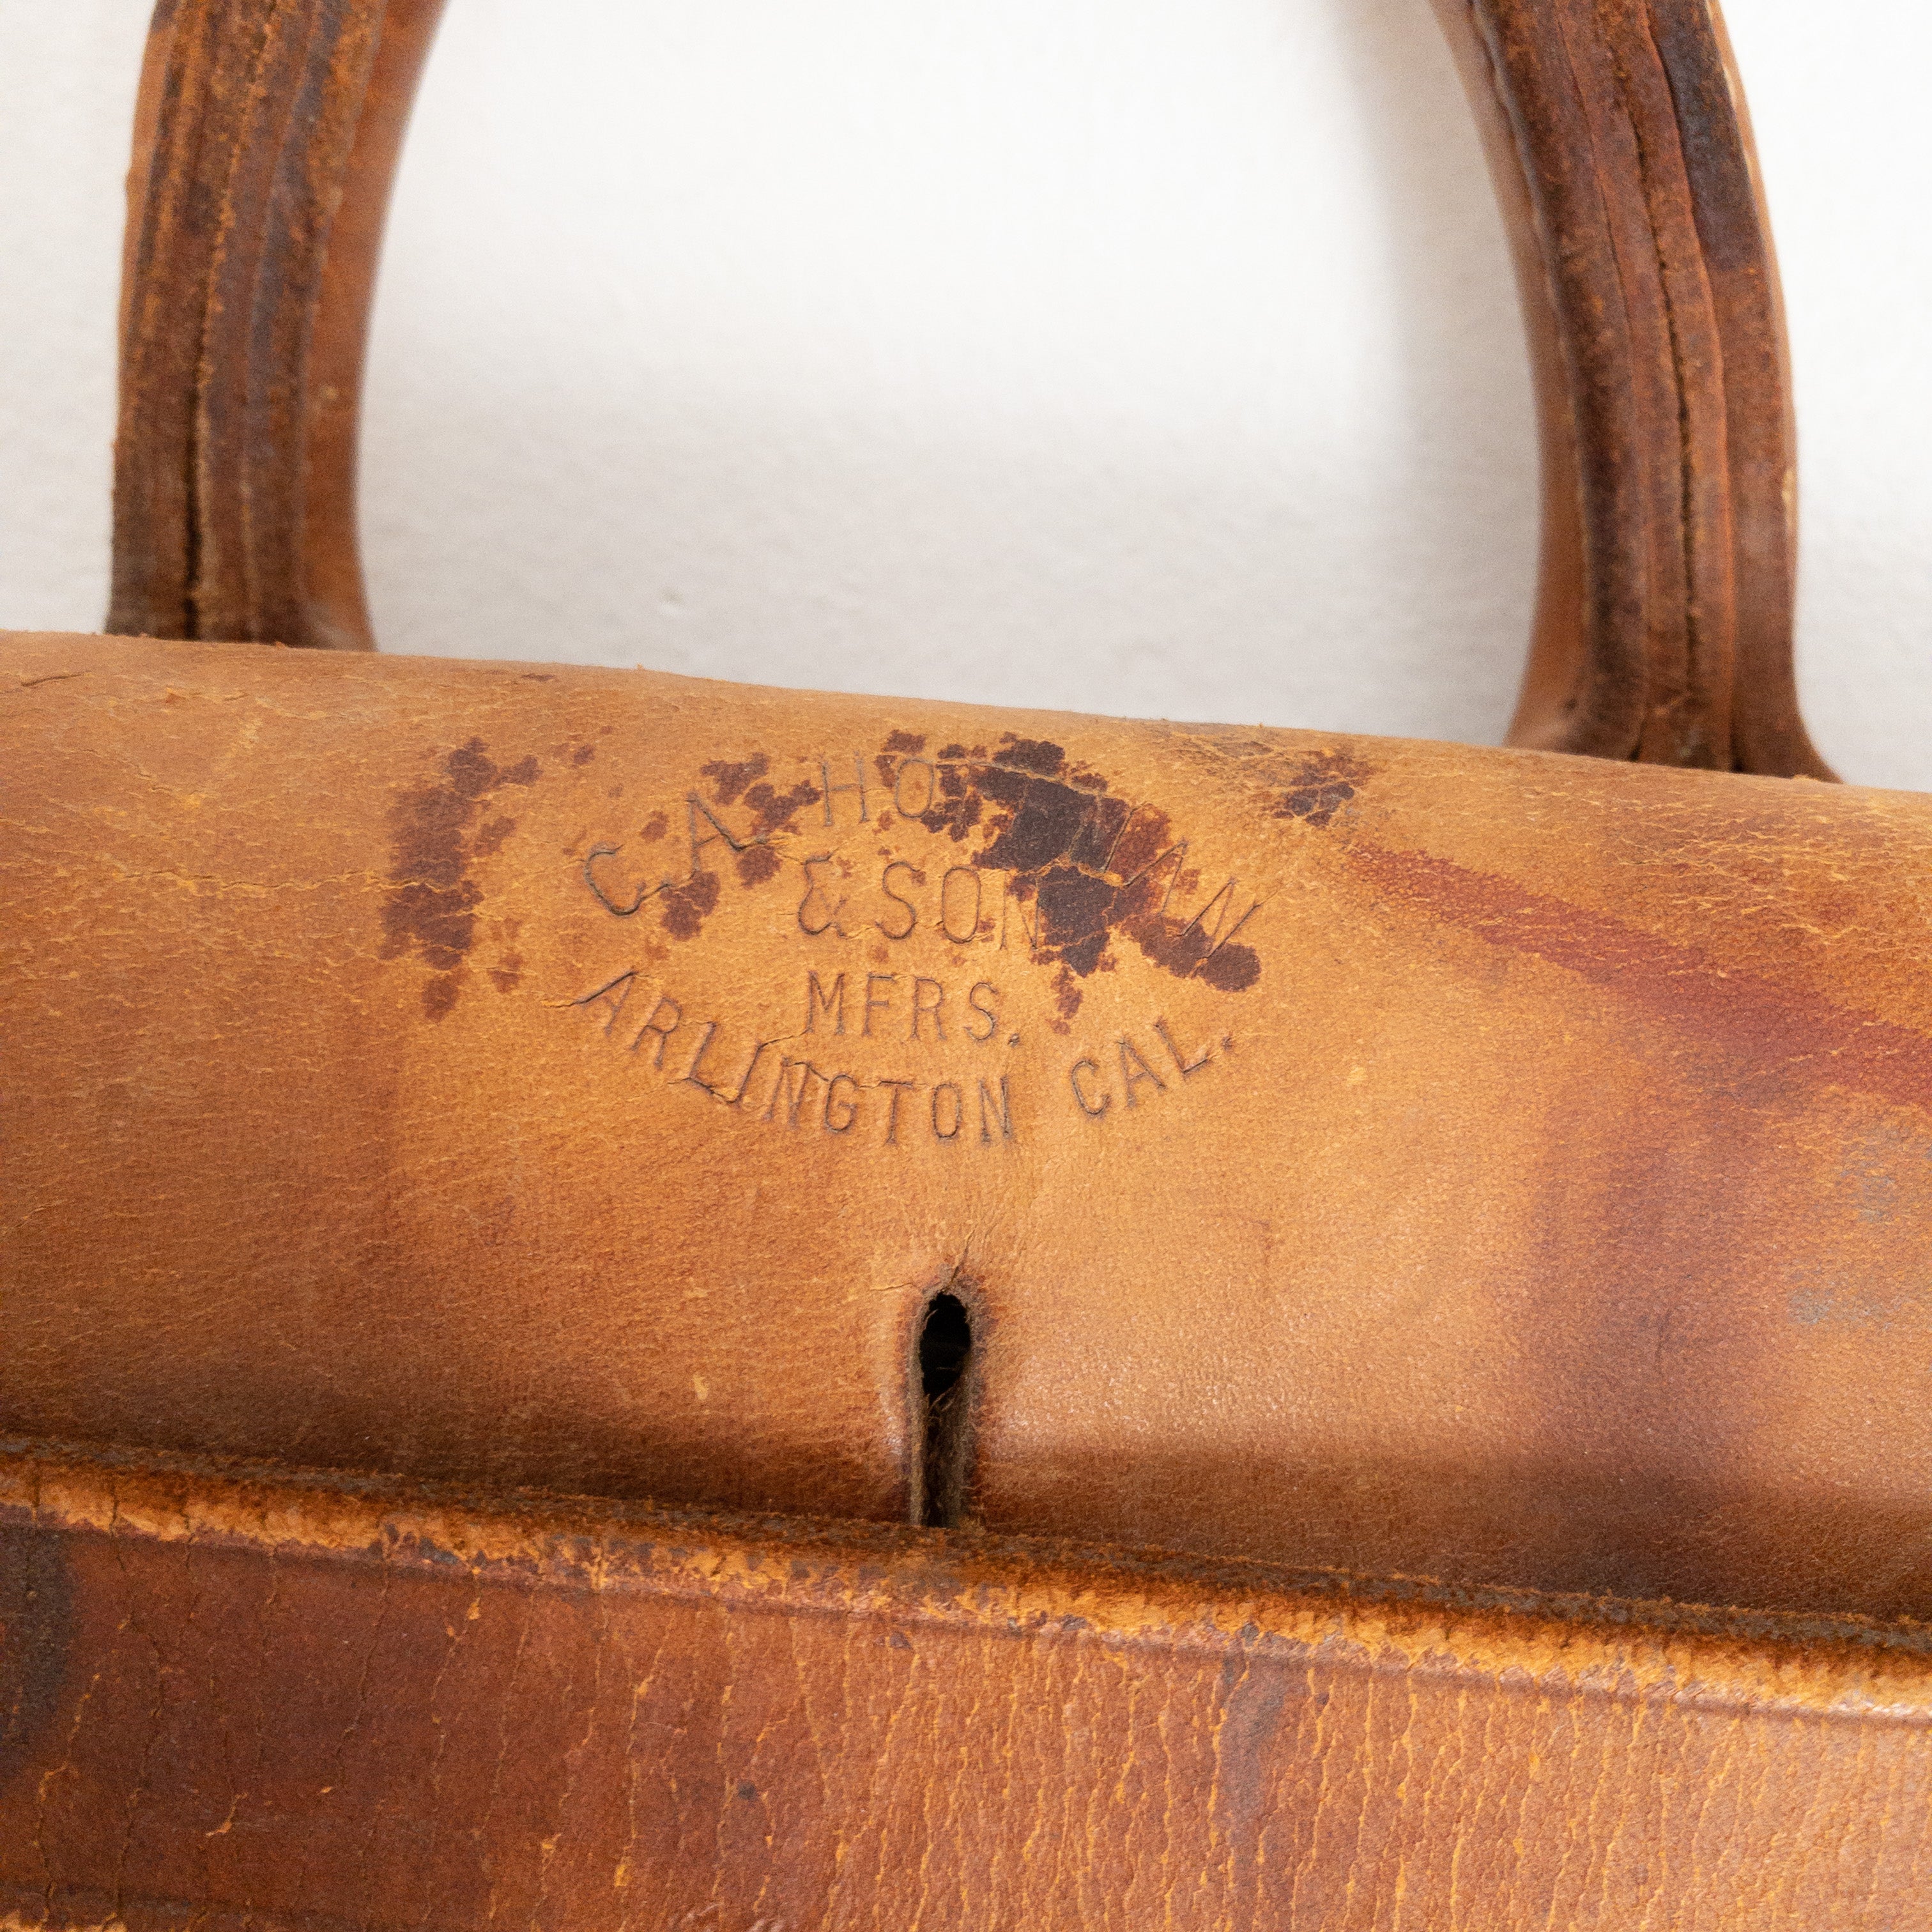 Antique French Brown Leather Gladstone Bag